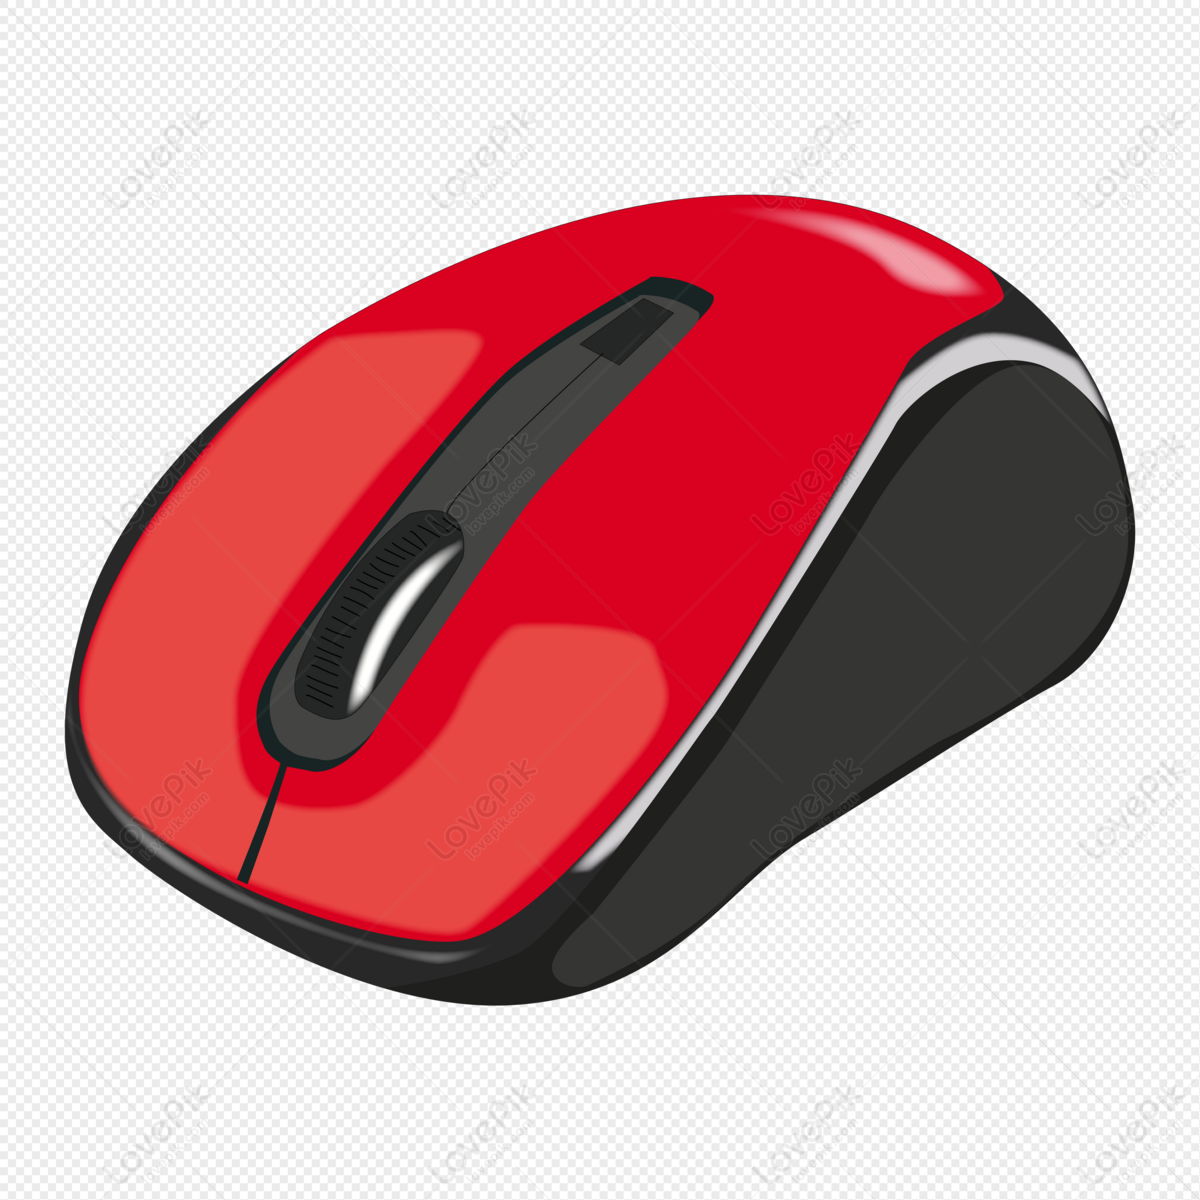 Cartoon Hand Drawn Red Black Mouse PNG Hd Transparent Image And Clipart  Image For Free Download - Lovepik | 401405264